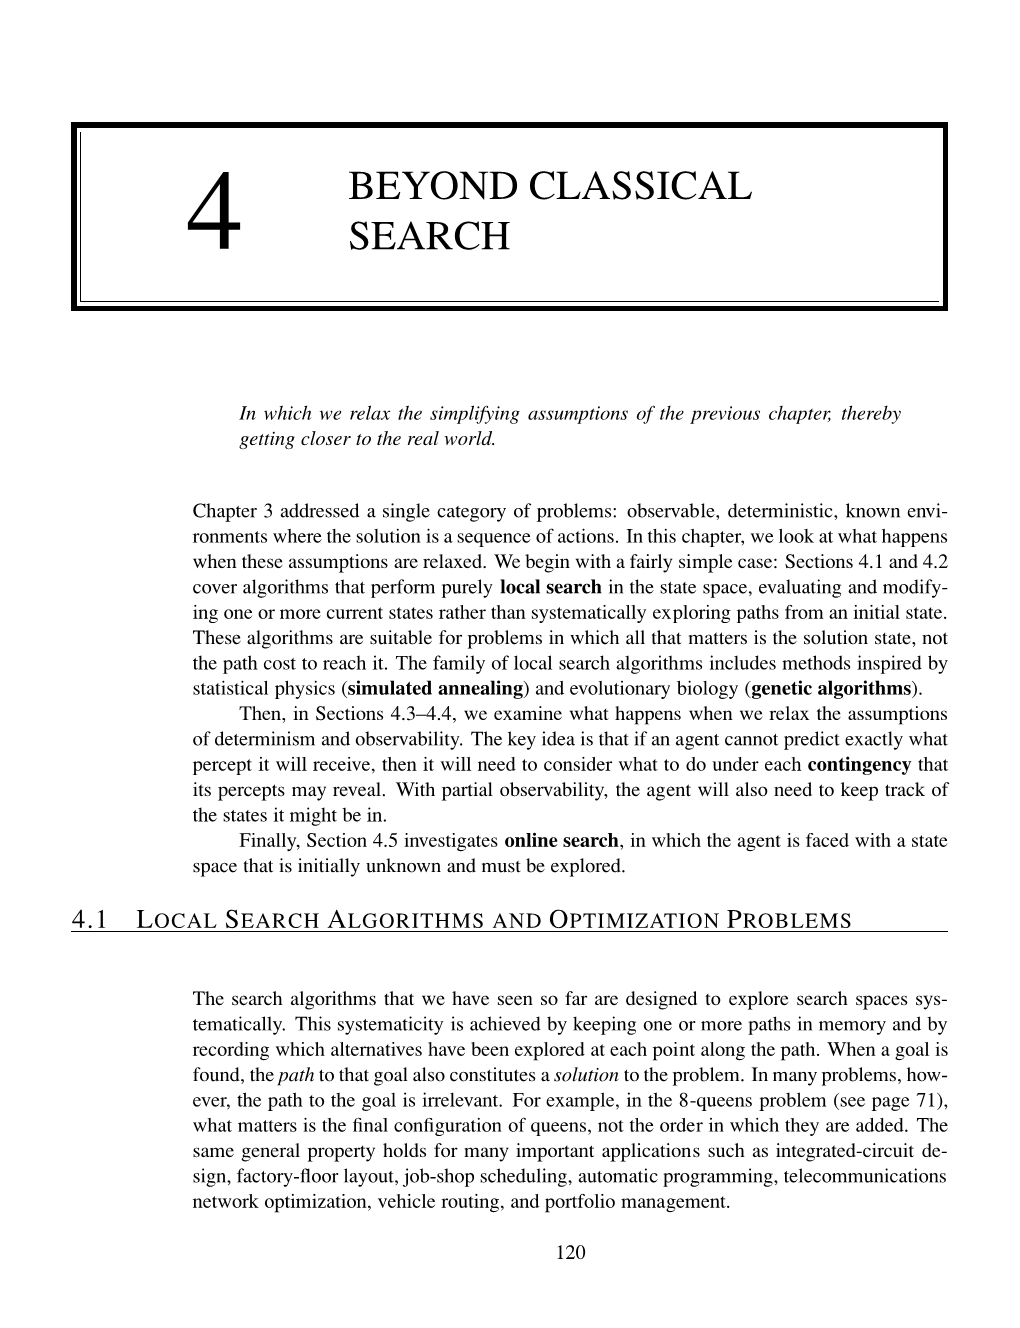 4 Beyond Classical Search